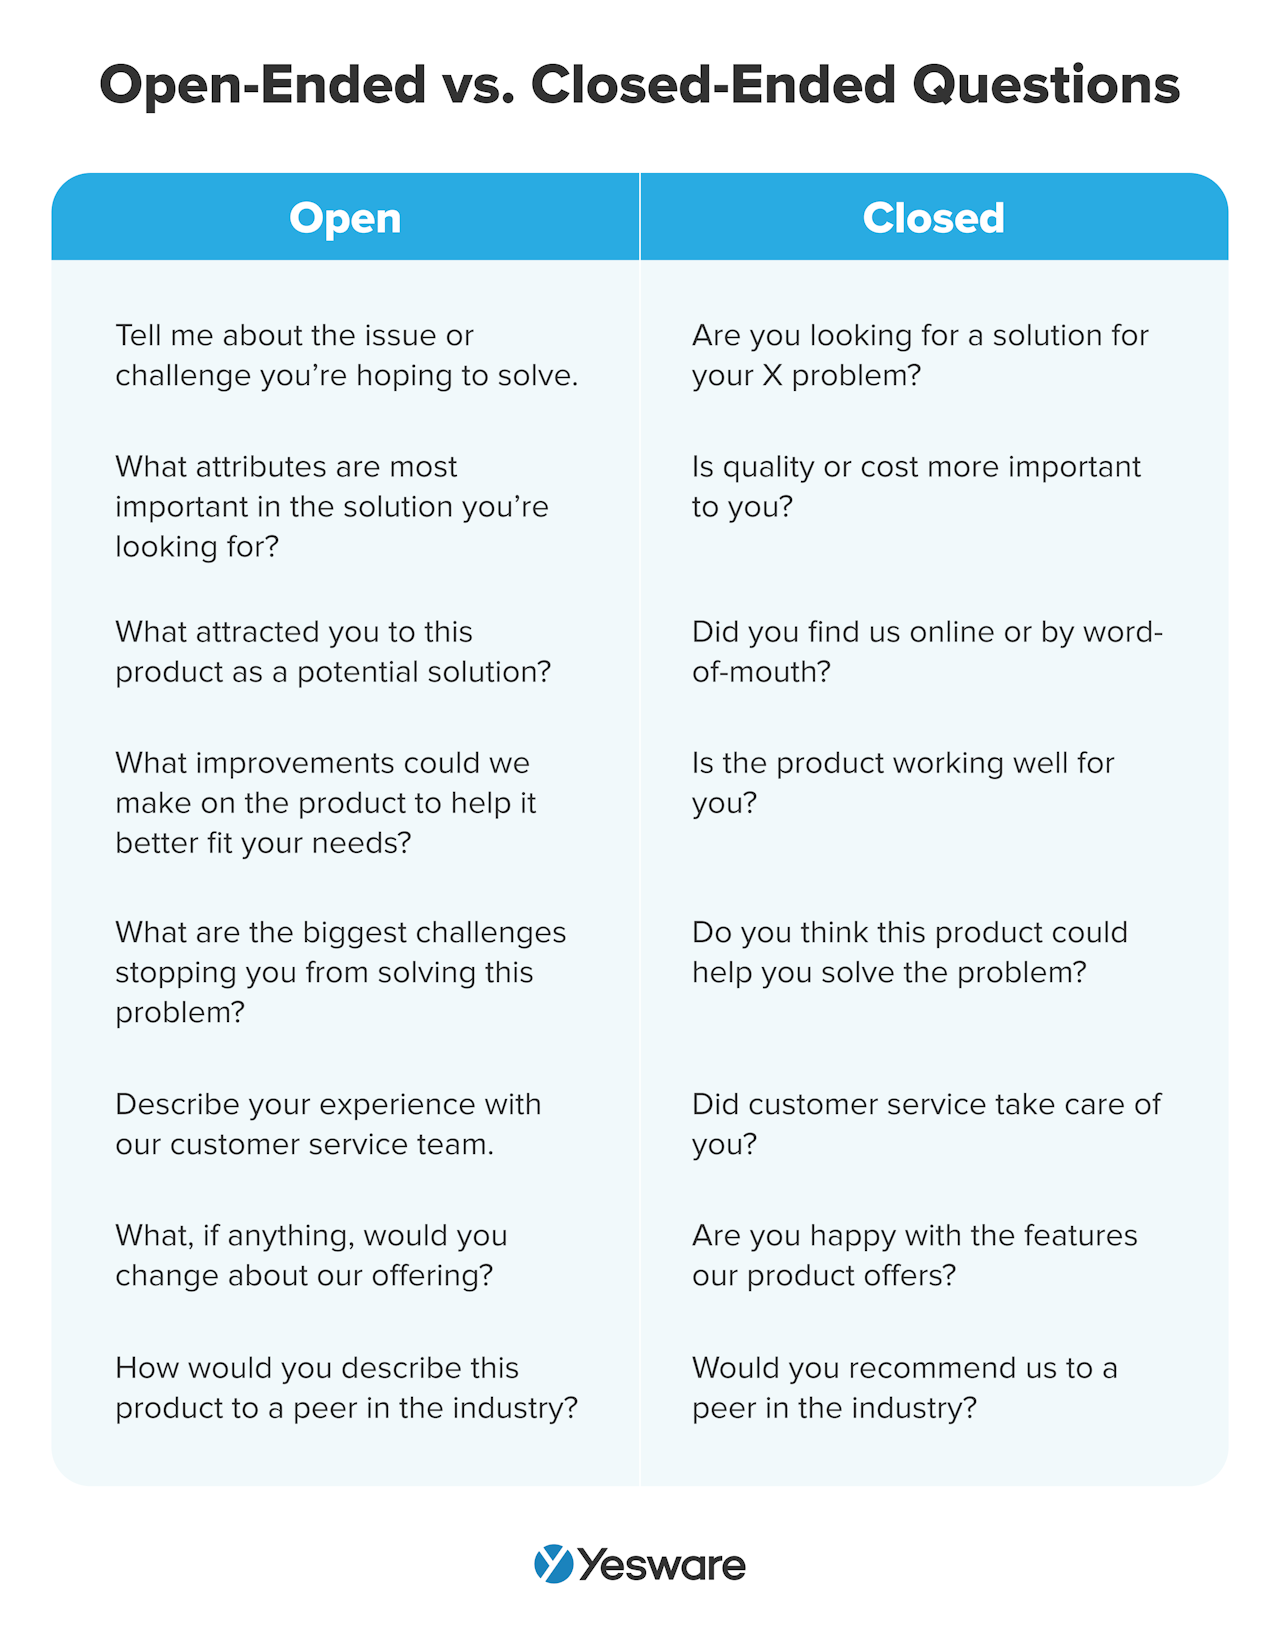 buying motives: open-ended vs. closed-ended questions